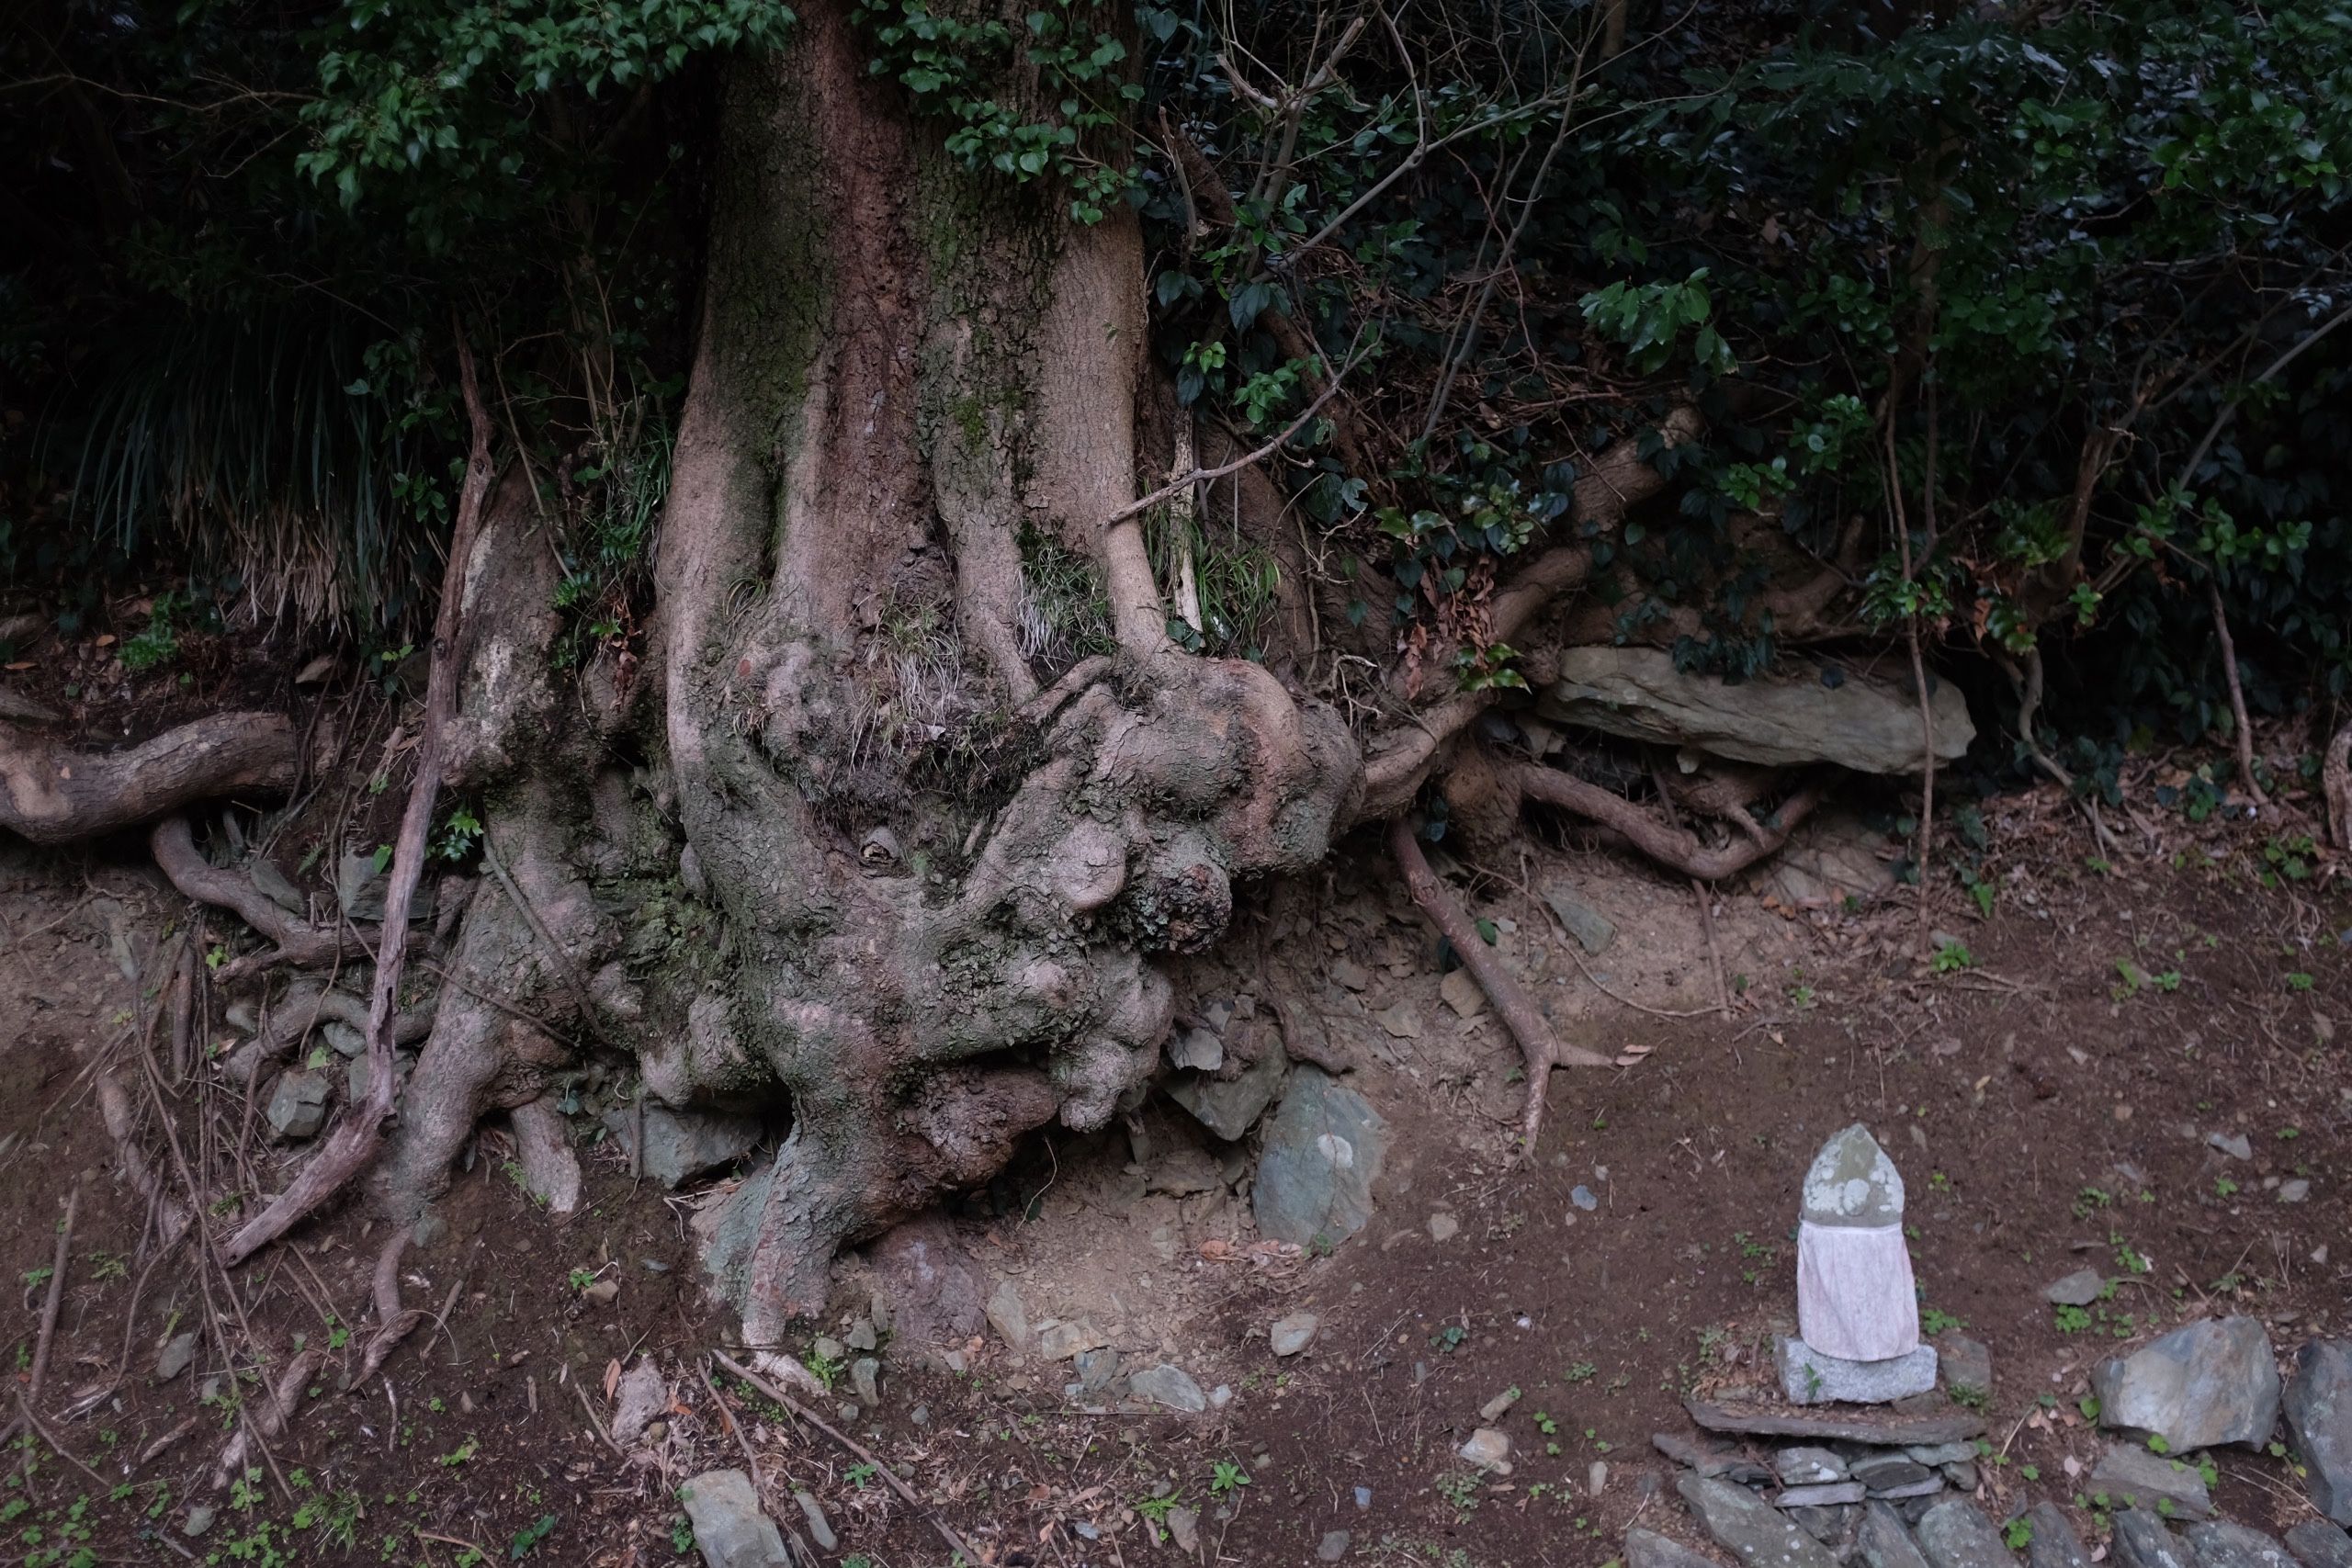 A small roadside shrine nestled in the exposed roots of a very large tree.